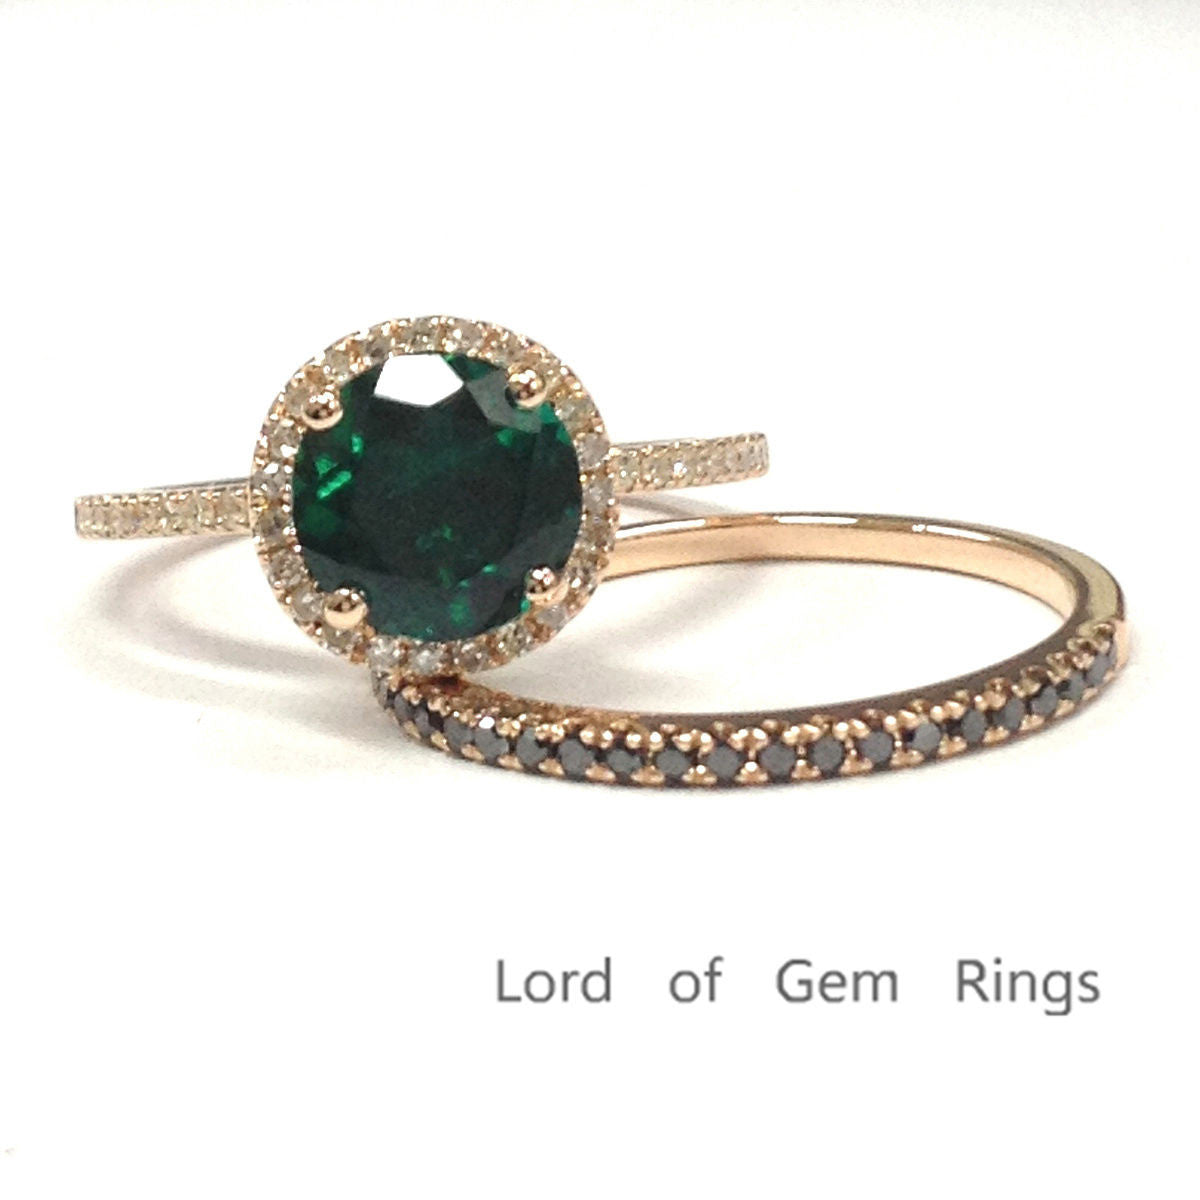 Round Emerald Engagement Ring Sets Pave Black Diamond Wedding Band 14K Rose Gold 7mm - Lord of Gem Rings - 1